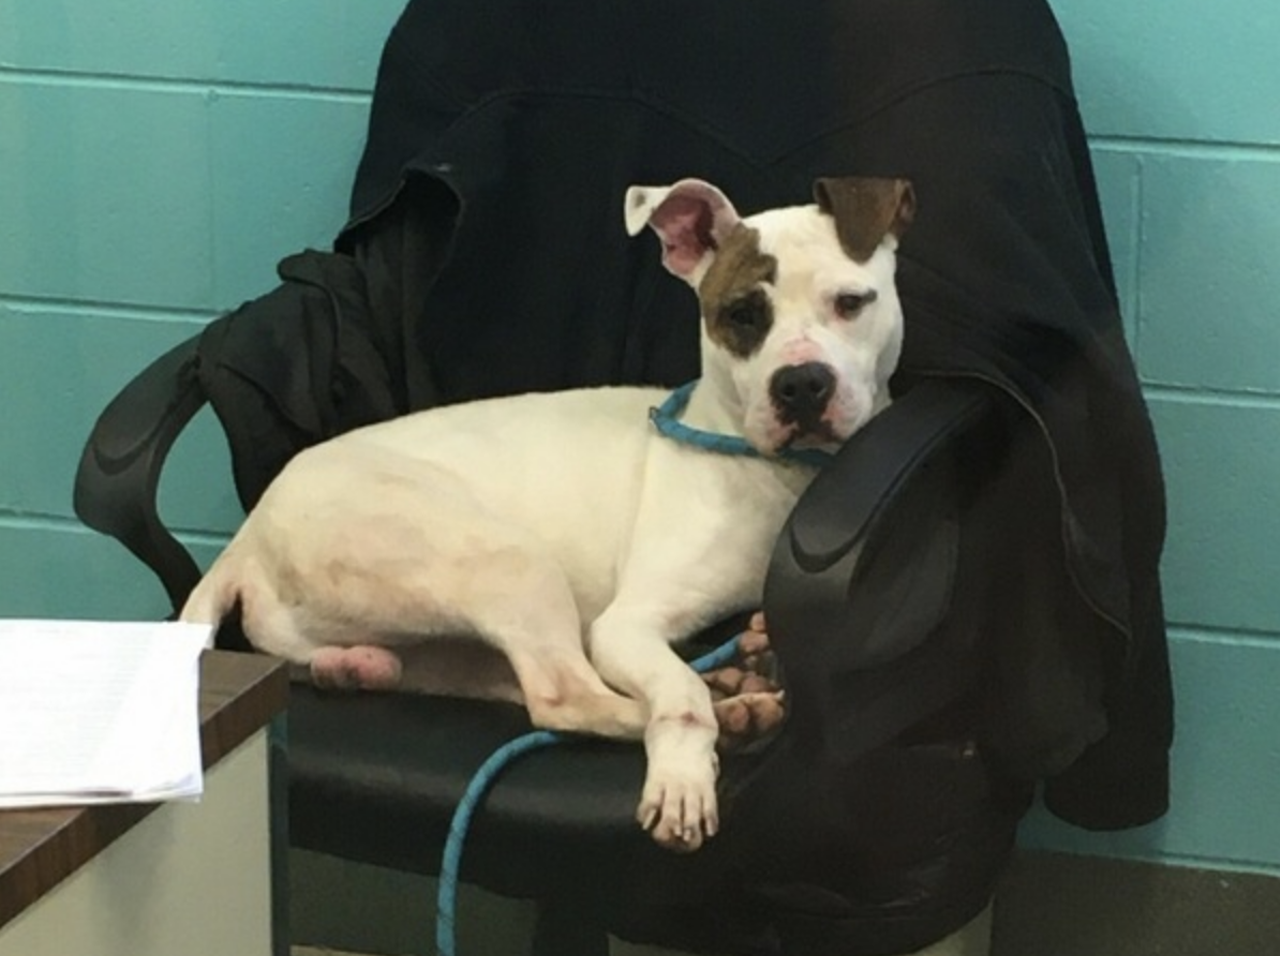  Lambchop
Age: 2 years old / Breed: 	Pit Bull Cross / Sex: Male
Lambchop is an adorable spotted pit bull mix who is healthy, up-to-date on his vaccines and neutered. Lambchop is not suitable for children.